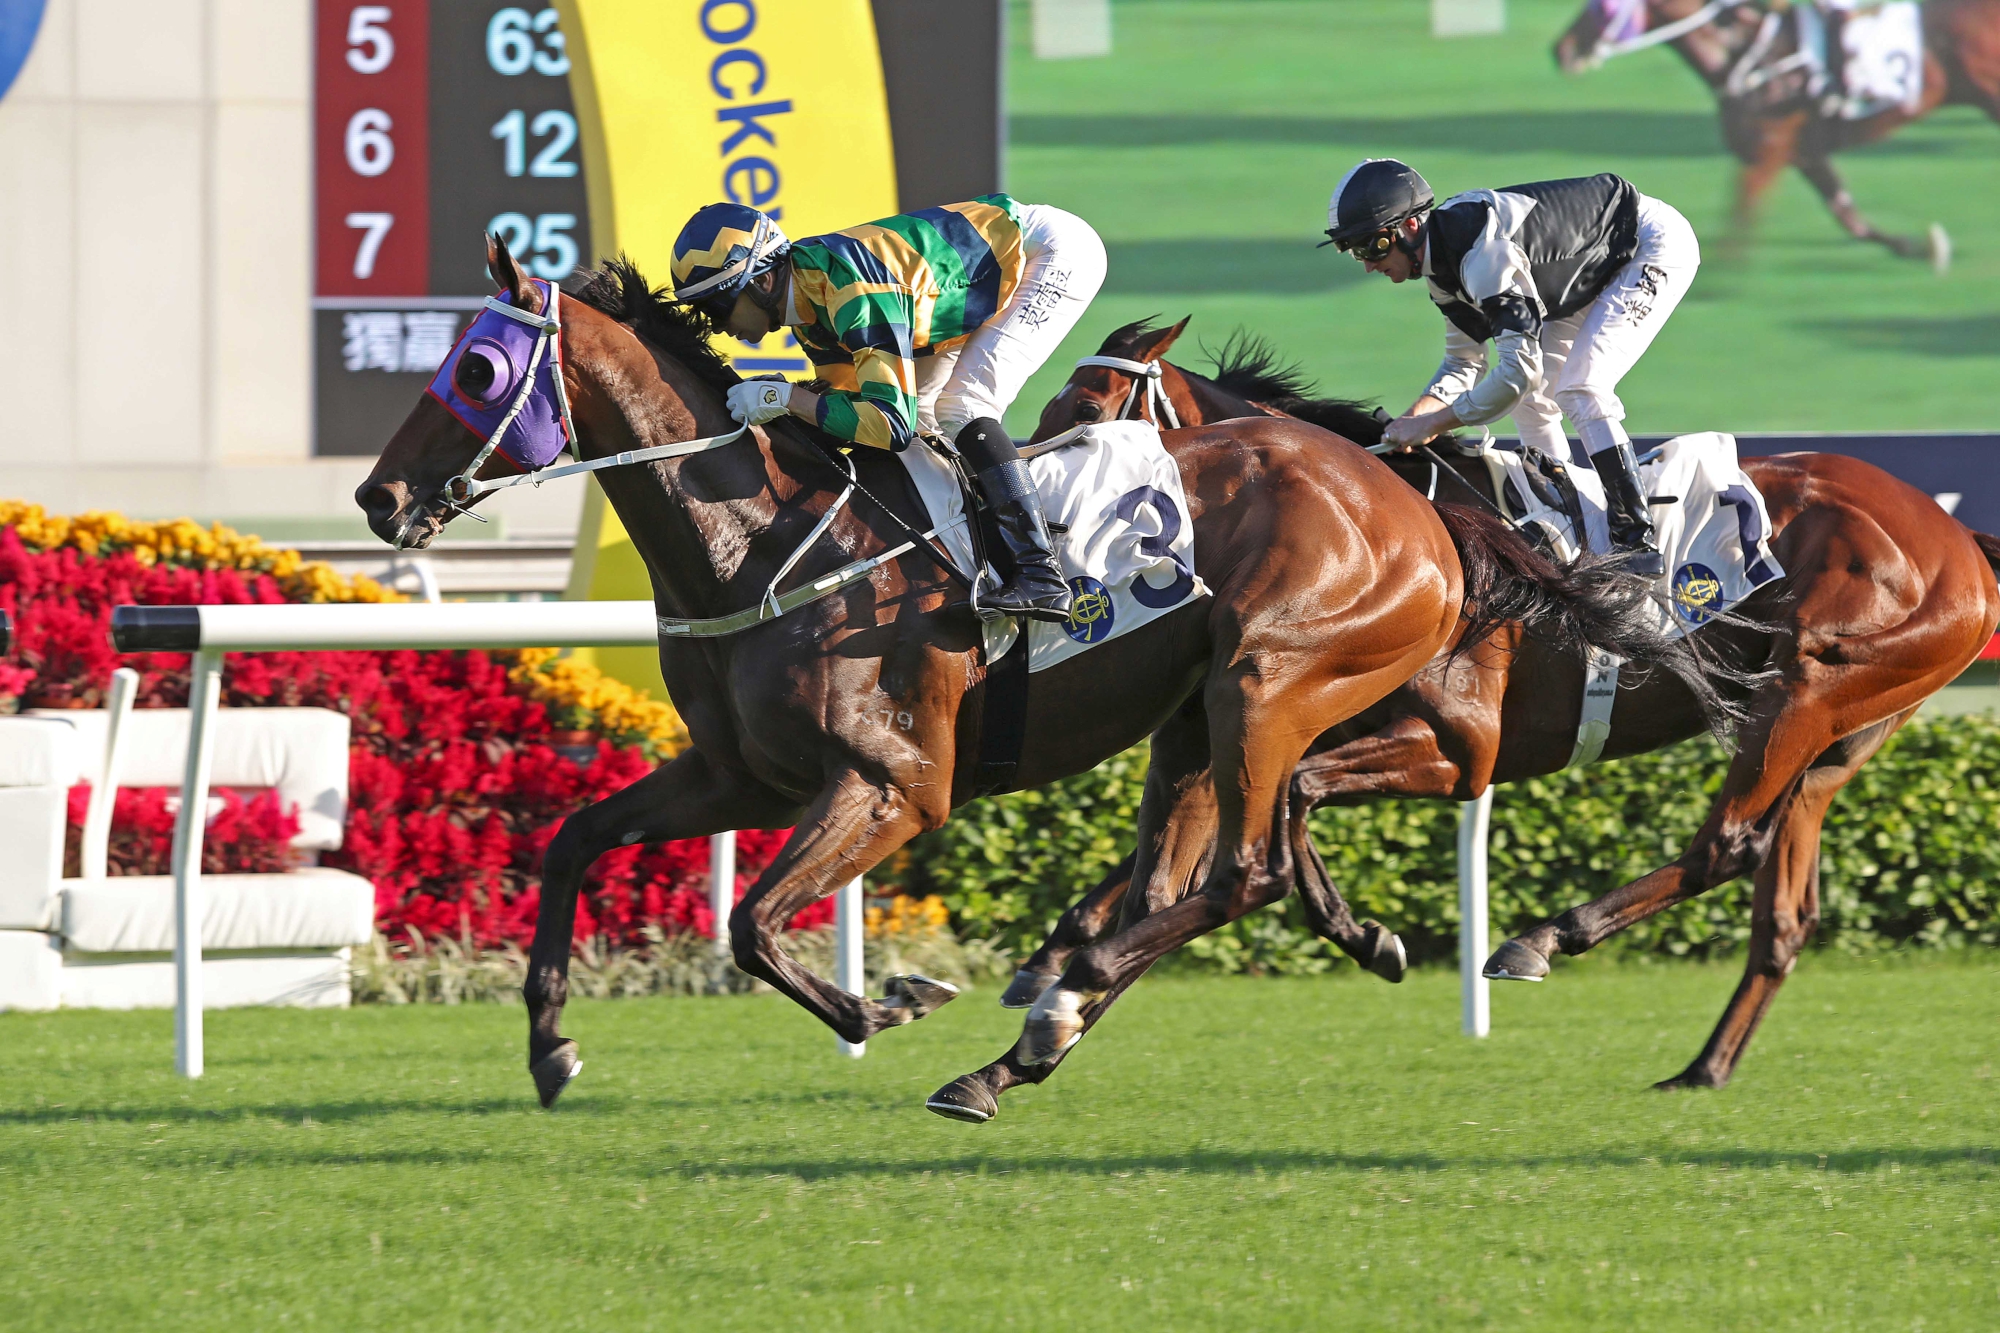 Furore – HK : 2019 BMW Hong Kong Derby hero who has returned to best with two Pattern race wins this season, G3 Sa Sa Ladies’ Purse and G2 Jockey Club Cup, twice beating Exultant.